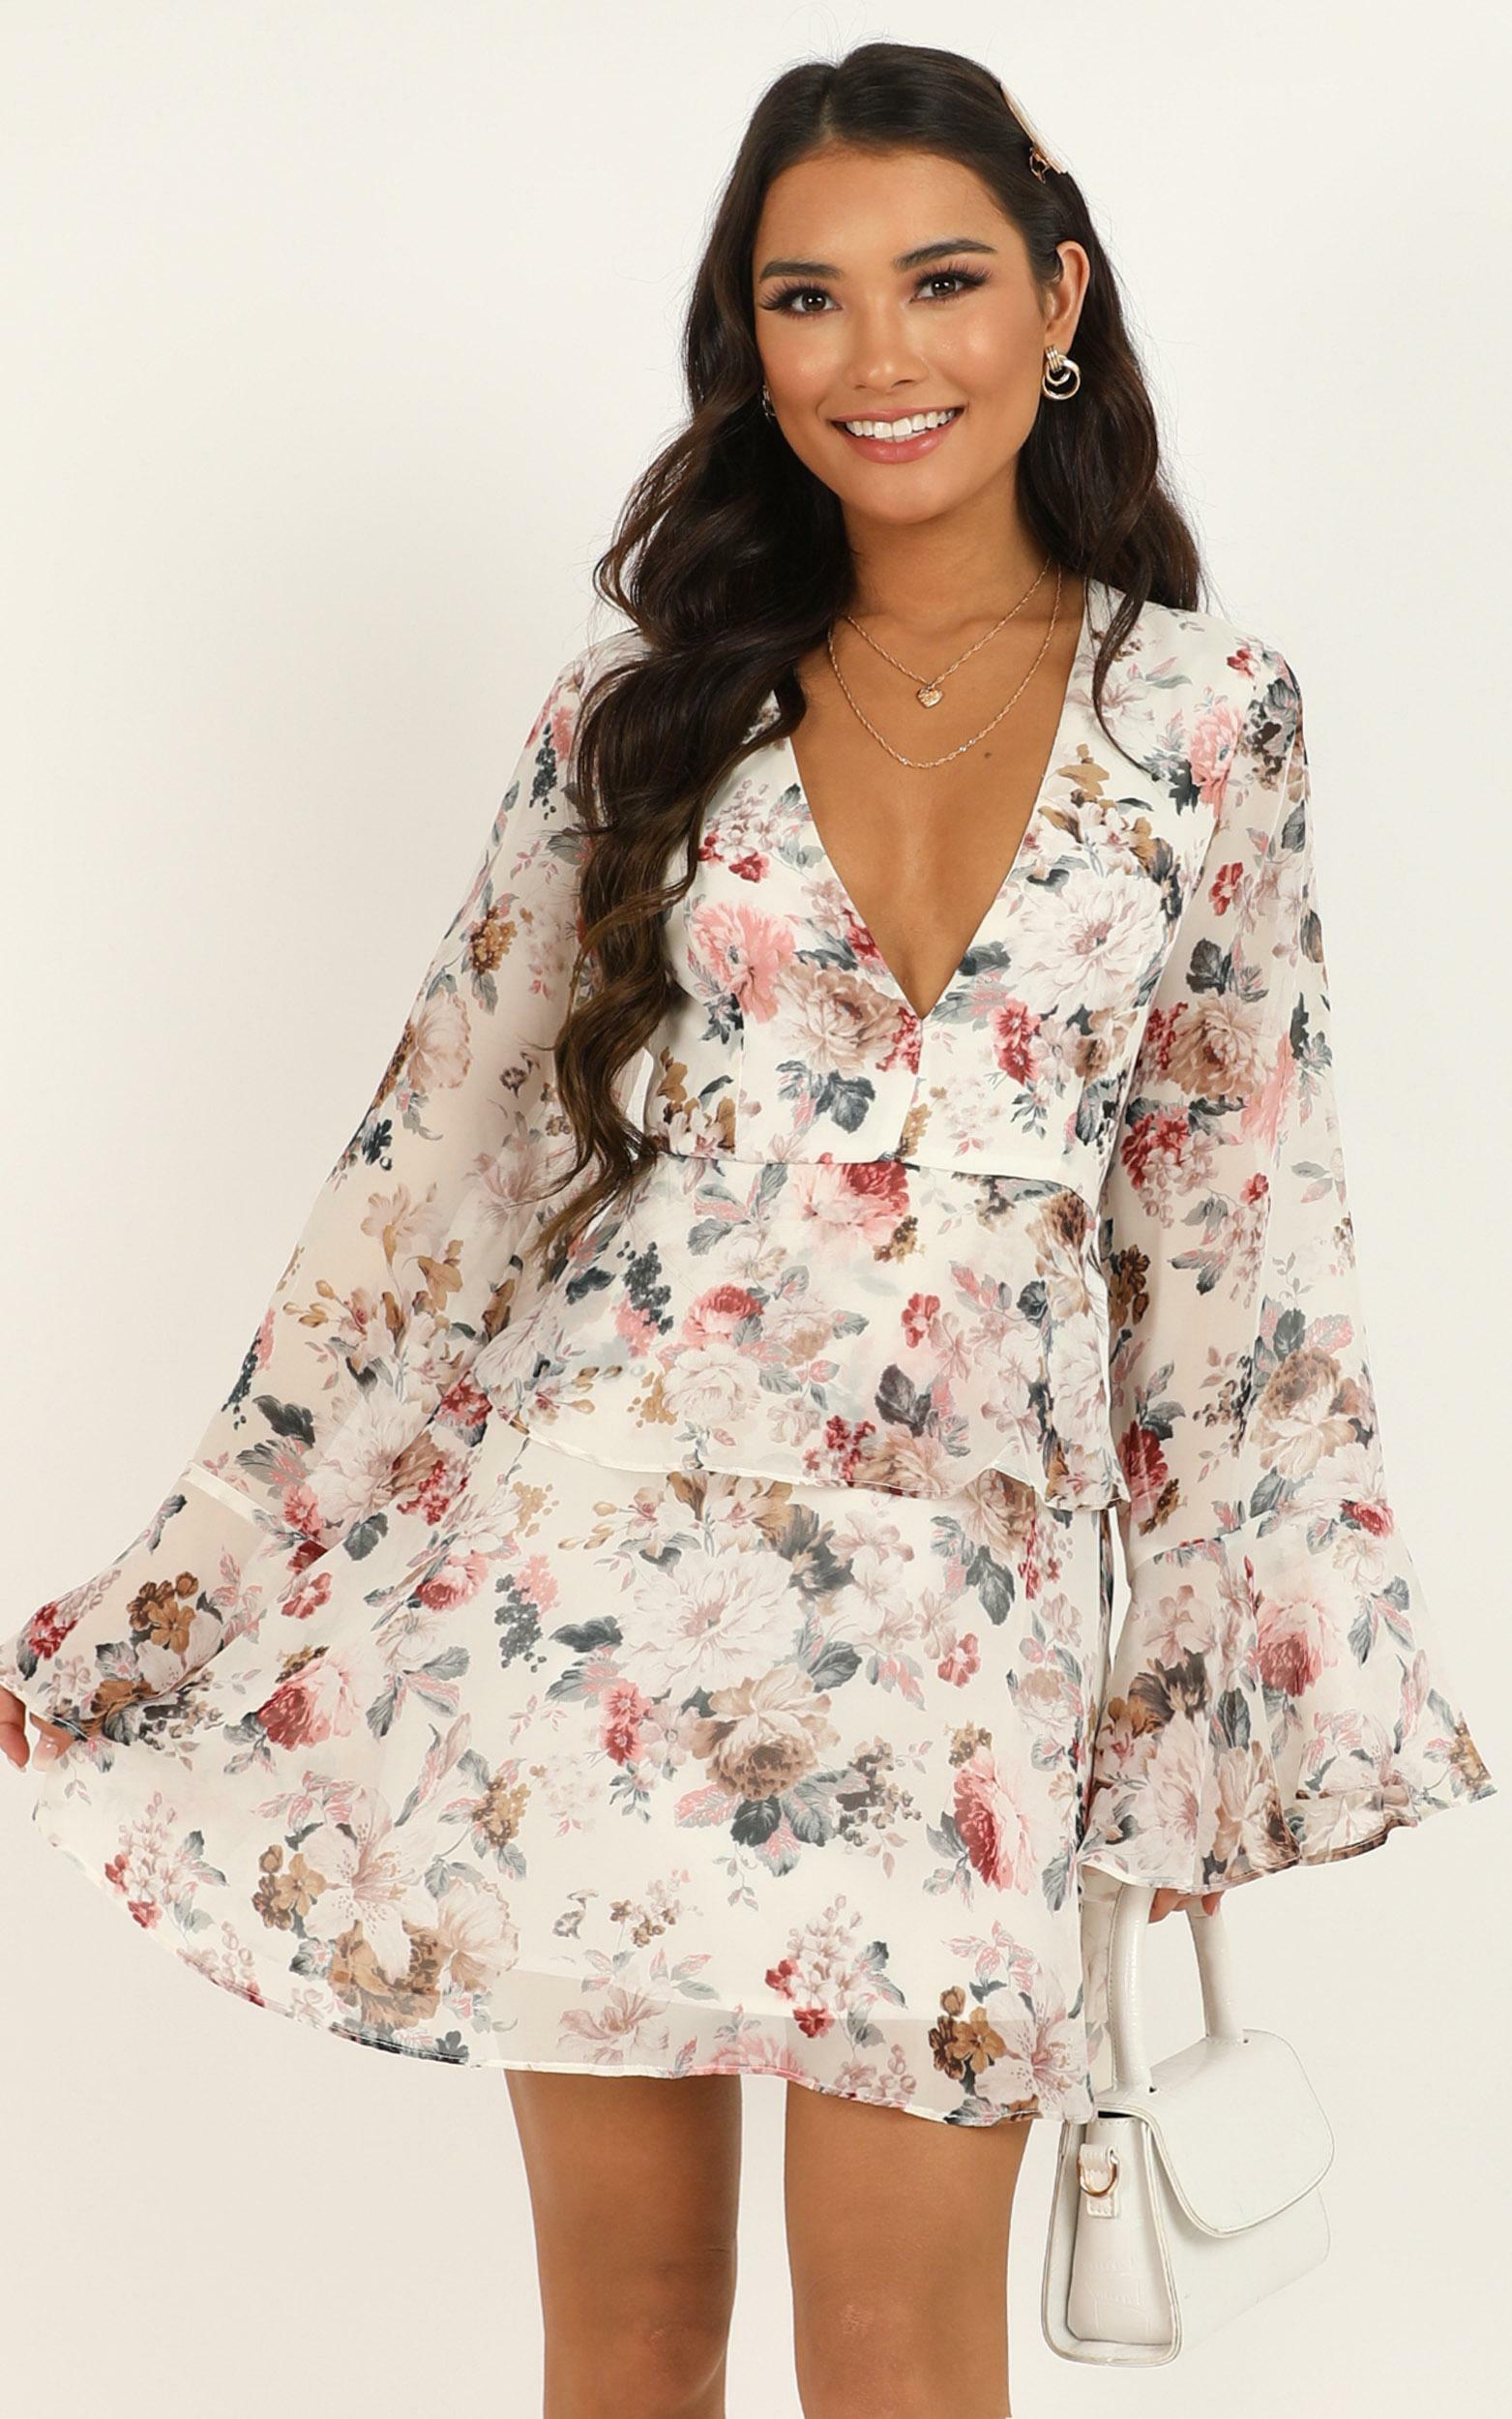 white and floral dress